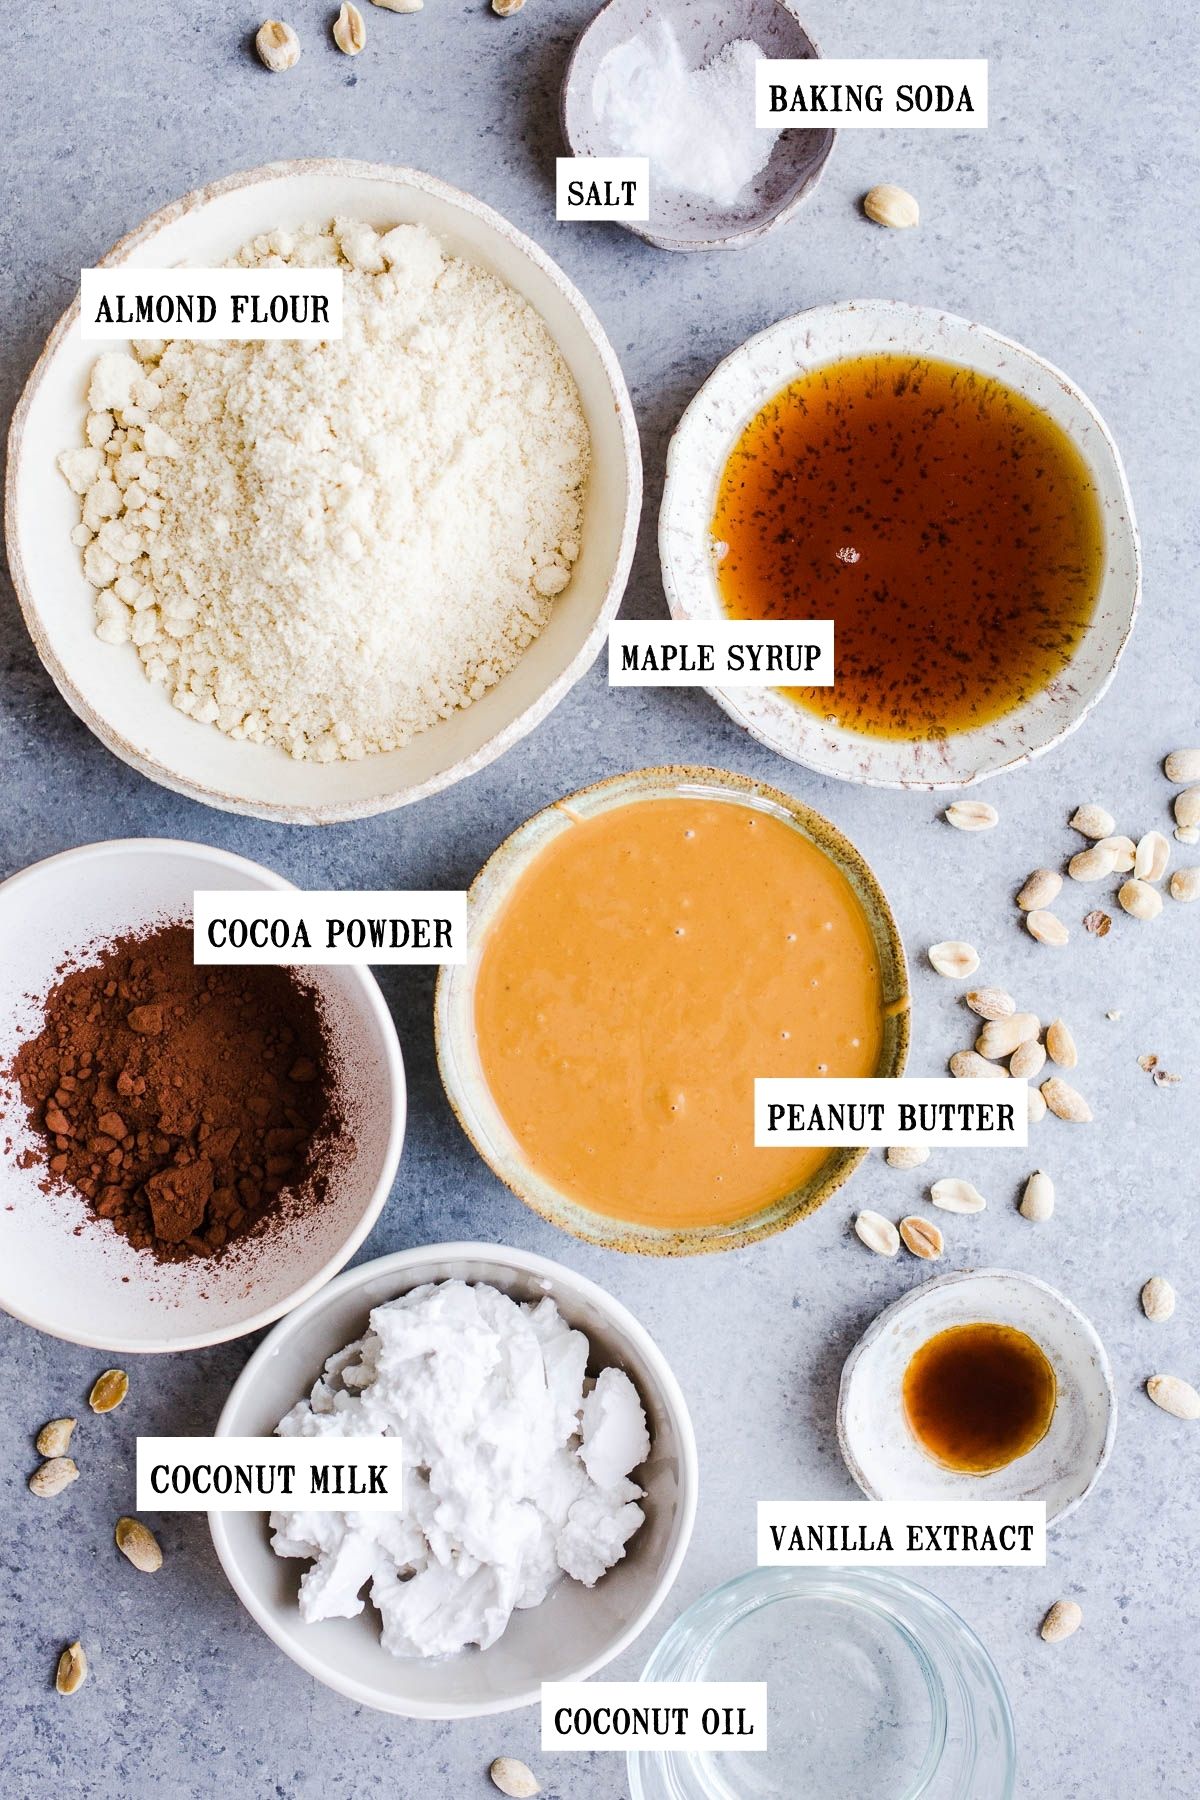 Ingredients for peanut butter pie in small ceramic bowls on a gray surface.